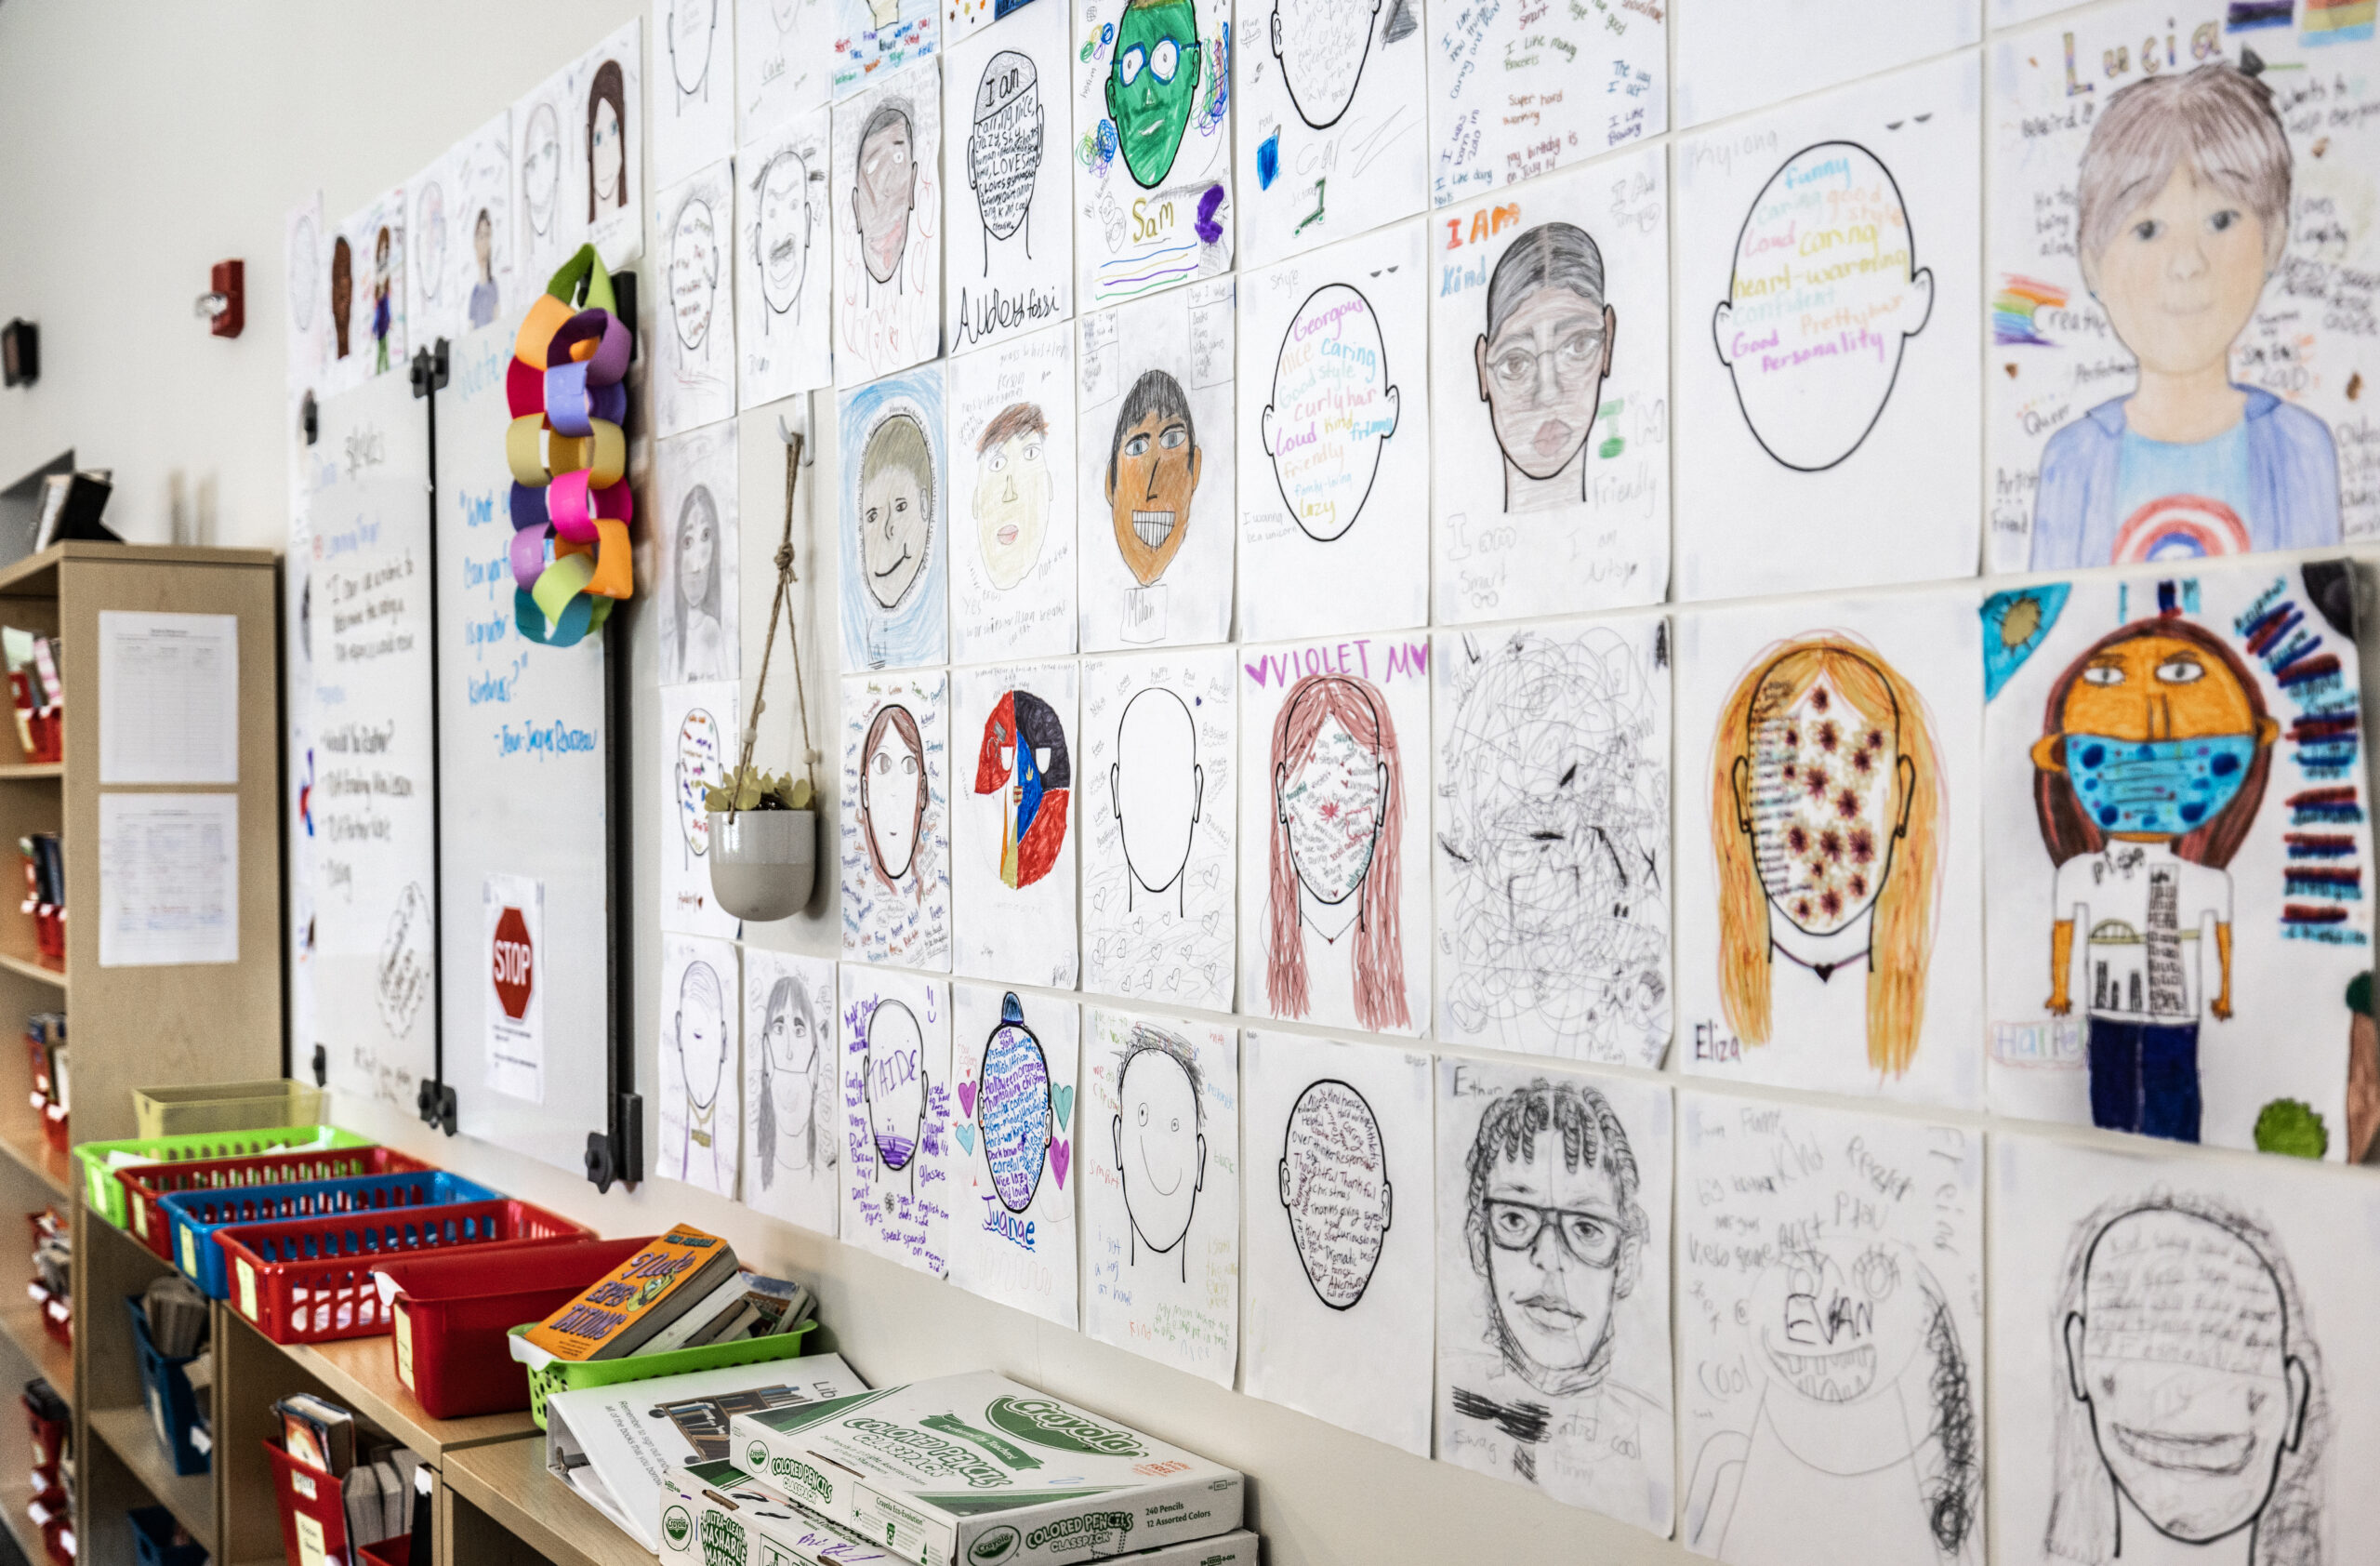 http://A%20classroom%20wall%20featuring%20a%20few%20dozen%20self-portraits%20drawn%20by%20students.